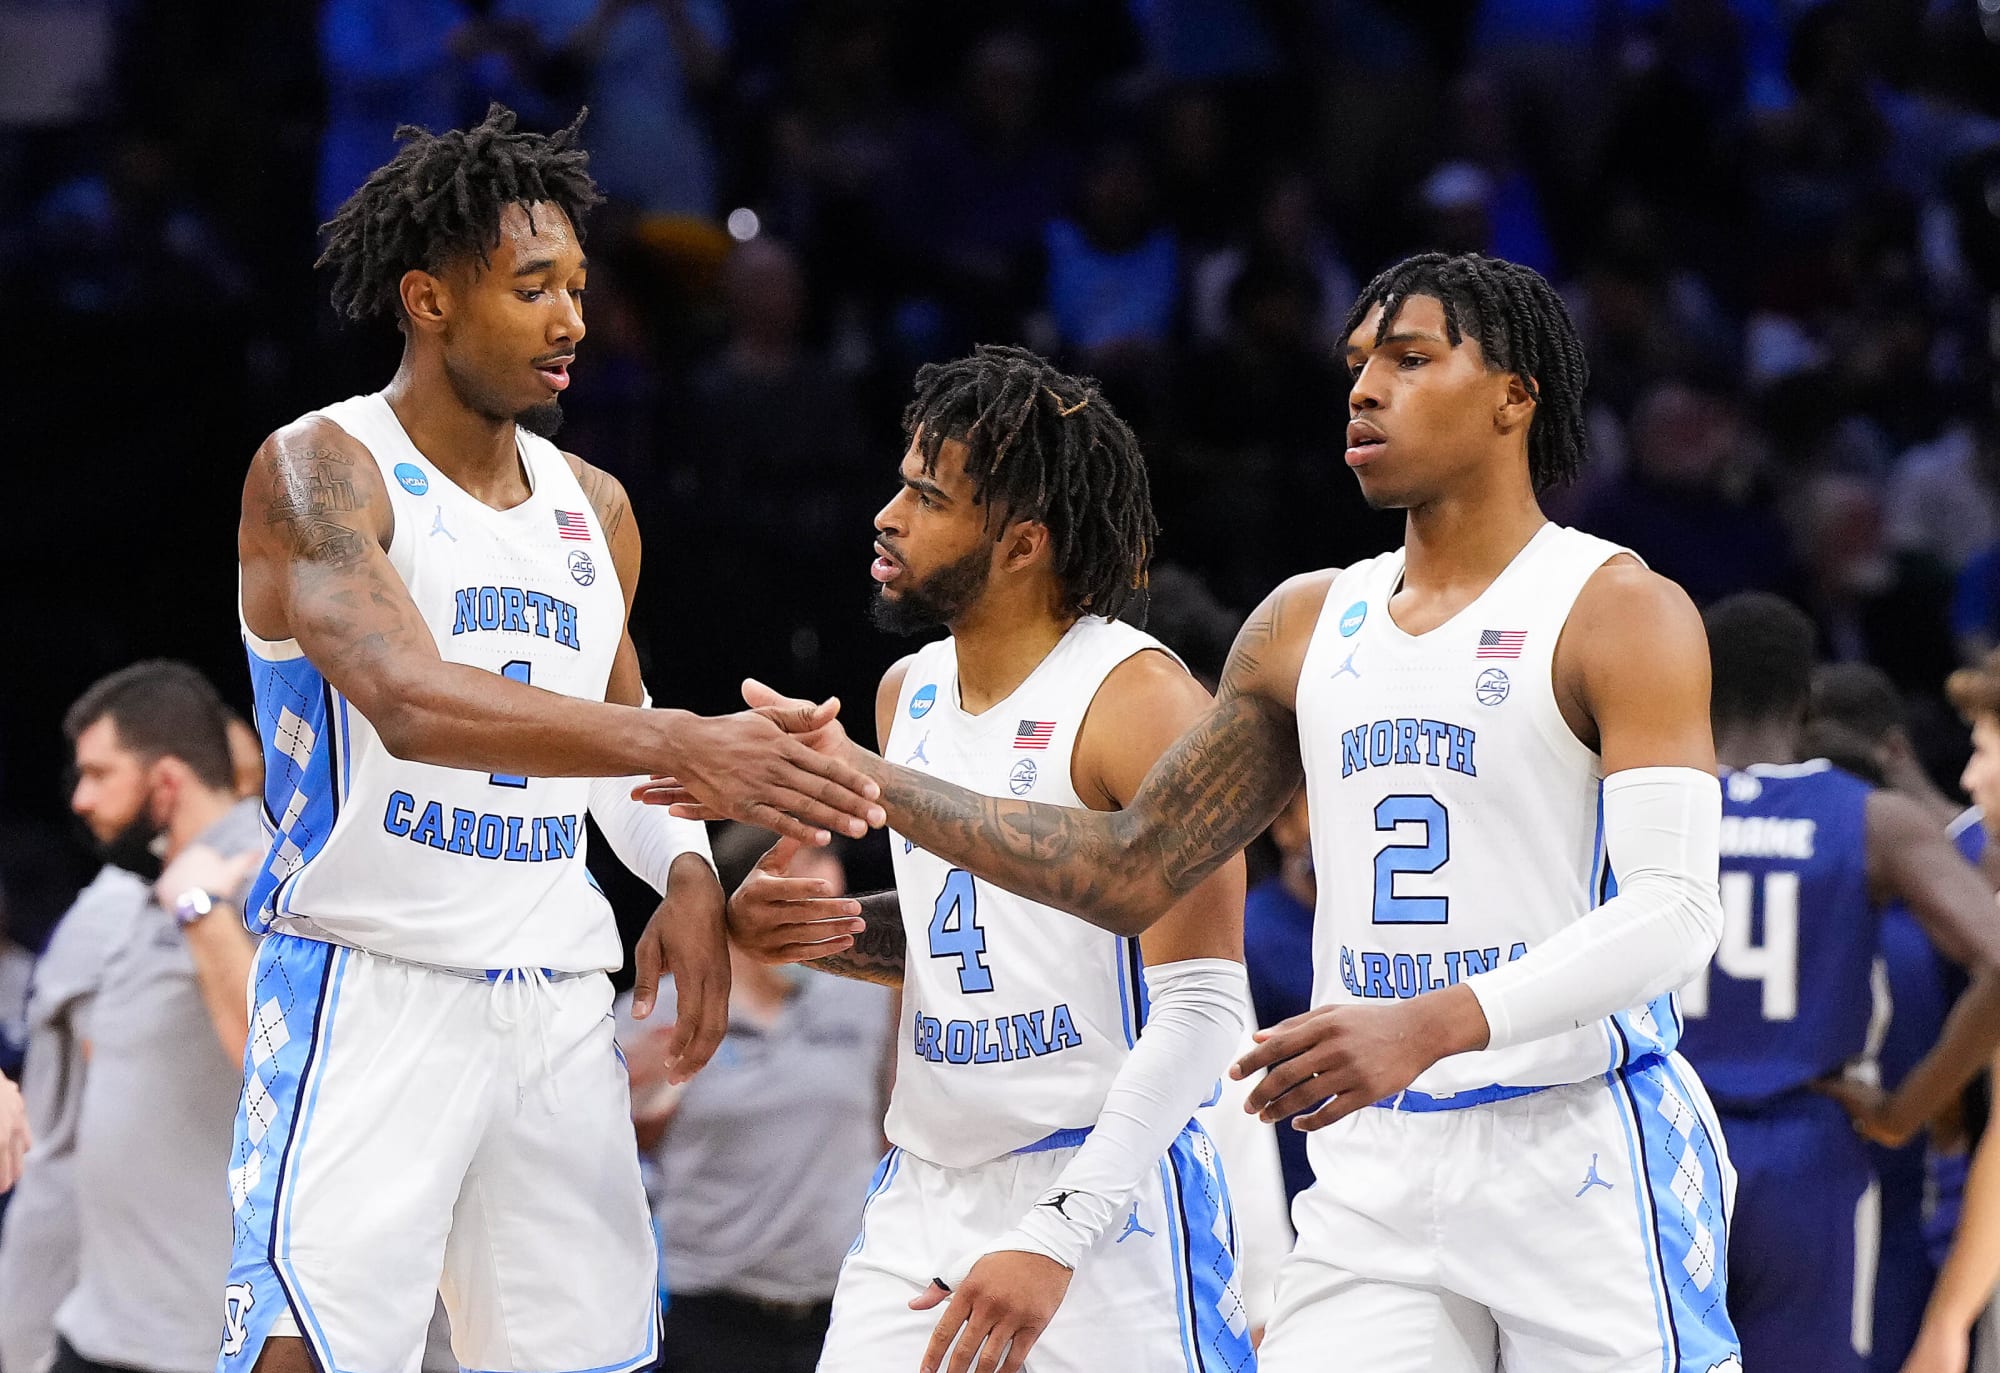 UNC Basketball 20222023 conference schedule released